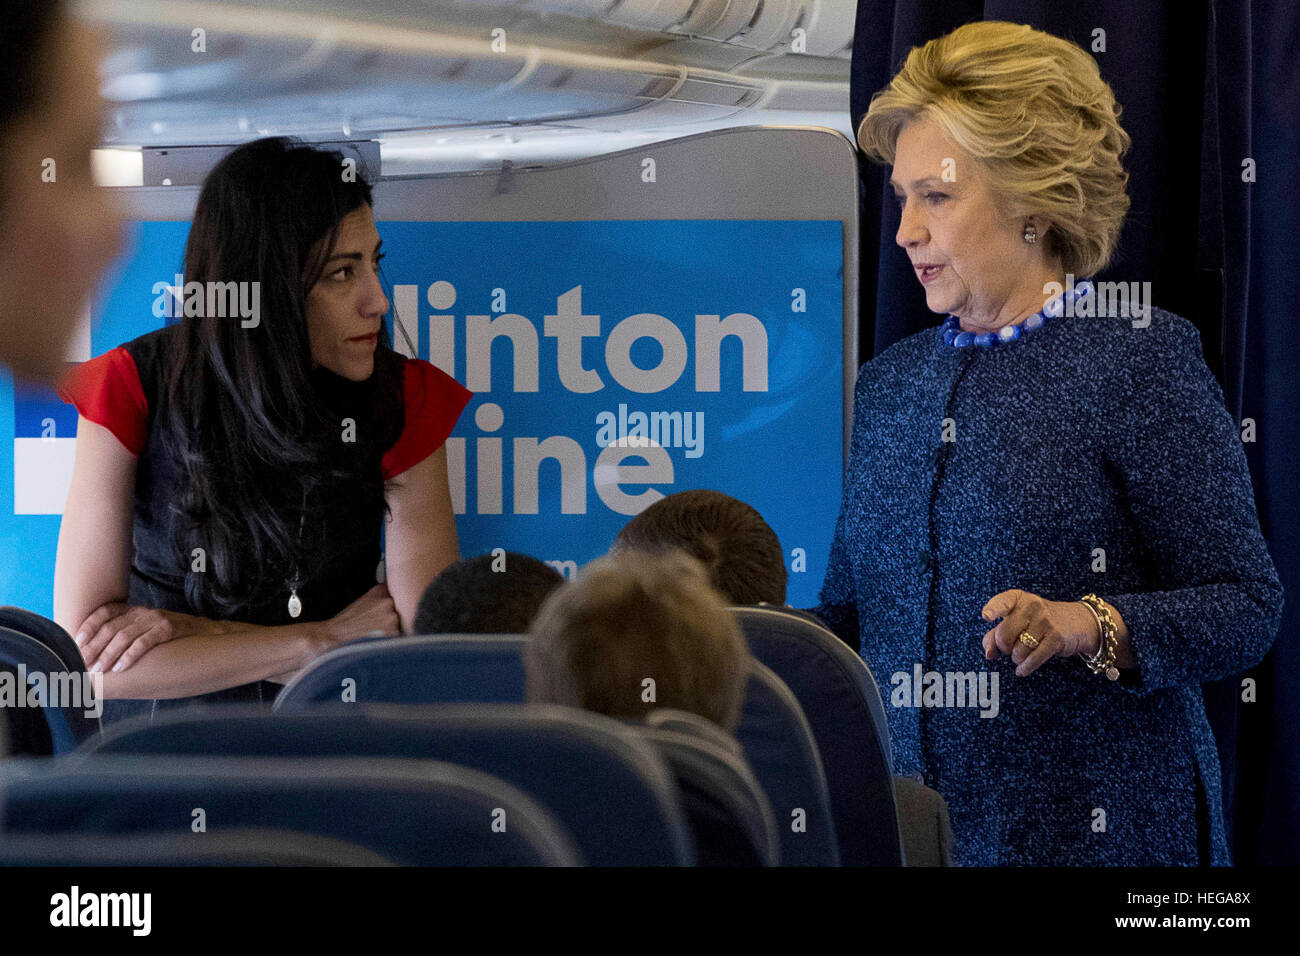 FILE - In this Oct. 28, 2016 file photo, Democratic presidential candidate Hillary Clinton speaks with senior aide Huma Abedin aboard her campaign plane at Westchester County Airport in White Plains. Amid the 2016 presidential campaign, the FBI conducted an investigation into Clinton's use of a private computer server to handle emails she sent and received as secretary of state. FBI Director James Comey criticized Clinton for carelessness but said the bureau would not recommend criminal charges. (AP Photo/Andrew Harnik, File) Stock Photo